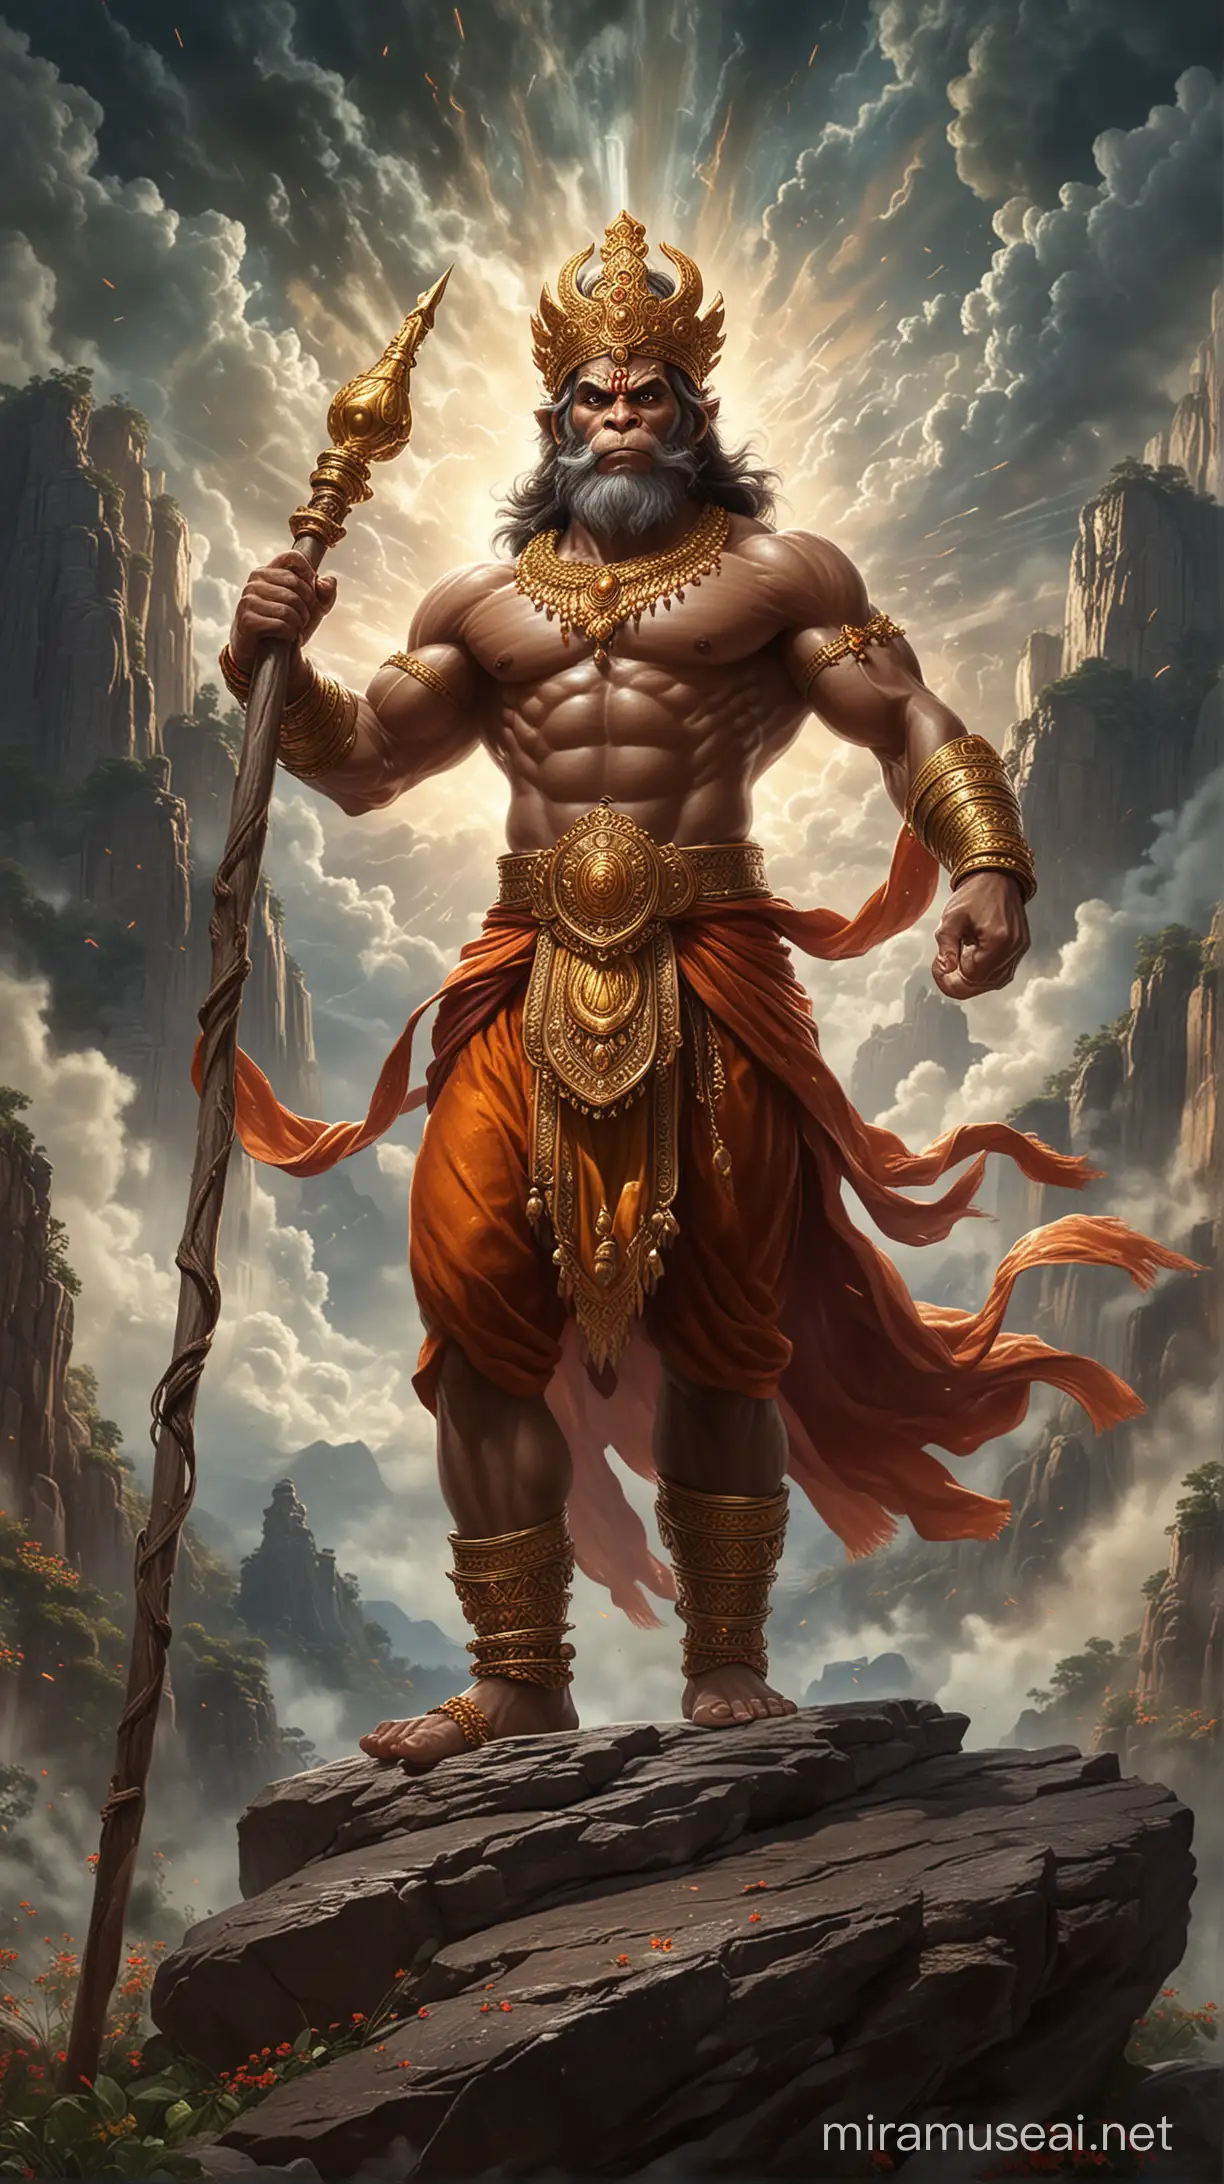 God Hanuman very muscular, tall, godly face, holding a huge Golden mace bomb in right hand pointing to the sky, wearing crown, standing on a hill top, one leg stepping on a big rock, battle field in the background, detailed and intricate environment, dynamic pose, muscles defined with chiseled aesthetics, traditional attire draped elegantly, vivid, ultra realistic.
Hanuman's face is depicted glowing with a divine radiance, symbolizing his divine nature and spiritual power. His aura signifies his purity, courage, and divine protection.
Hanuman is shown wearing a crown or headgear adorned with jewels, symbolizing his royal lineage and divine status as a deity.
Hanuman's face embodies a combination of strength, wisdom, devotion, and compassion.

Thunders roar and lightning dances in the sky, painting it with wild, vibrant colors. Each bolt of electricity illuminates the darkness, revealing the intricate patterns of clouds swirling like celestial brushstrokes. The rumble of thunder echoes through the air, shaking the earth beneath with its power. Nature's own fireworks display, a spectacle both awe-inspiring and humbling, as if the sky itself has come alive with energy and passion. 